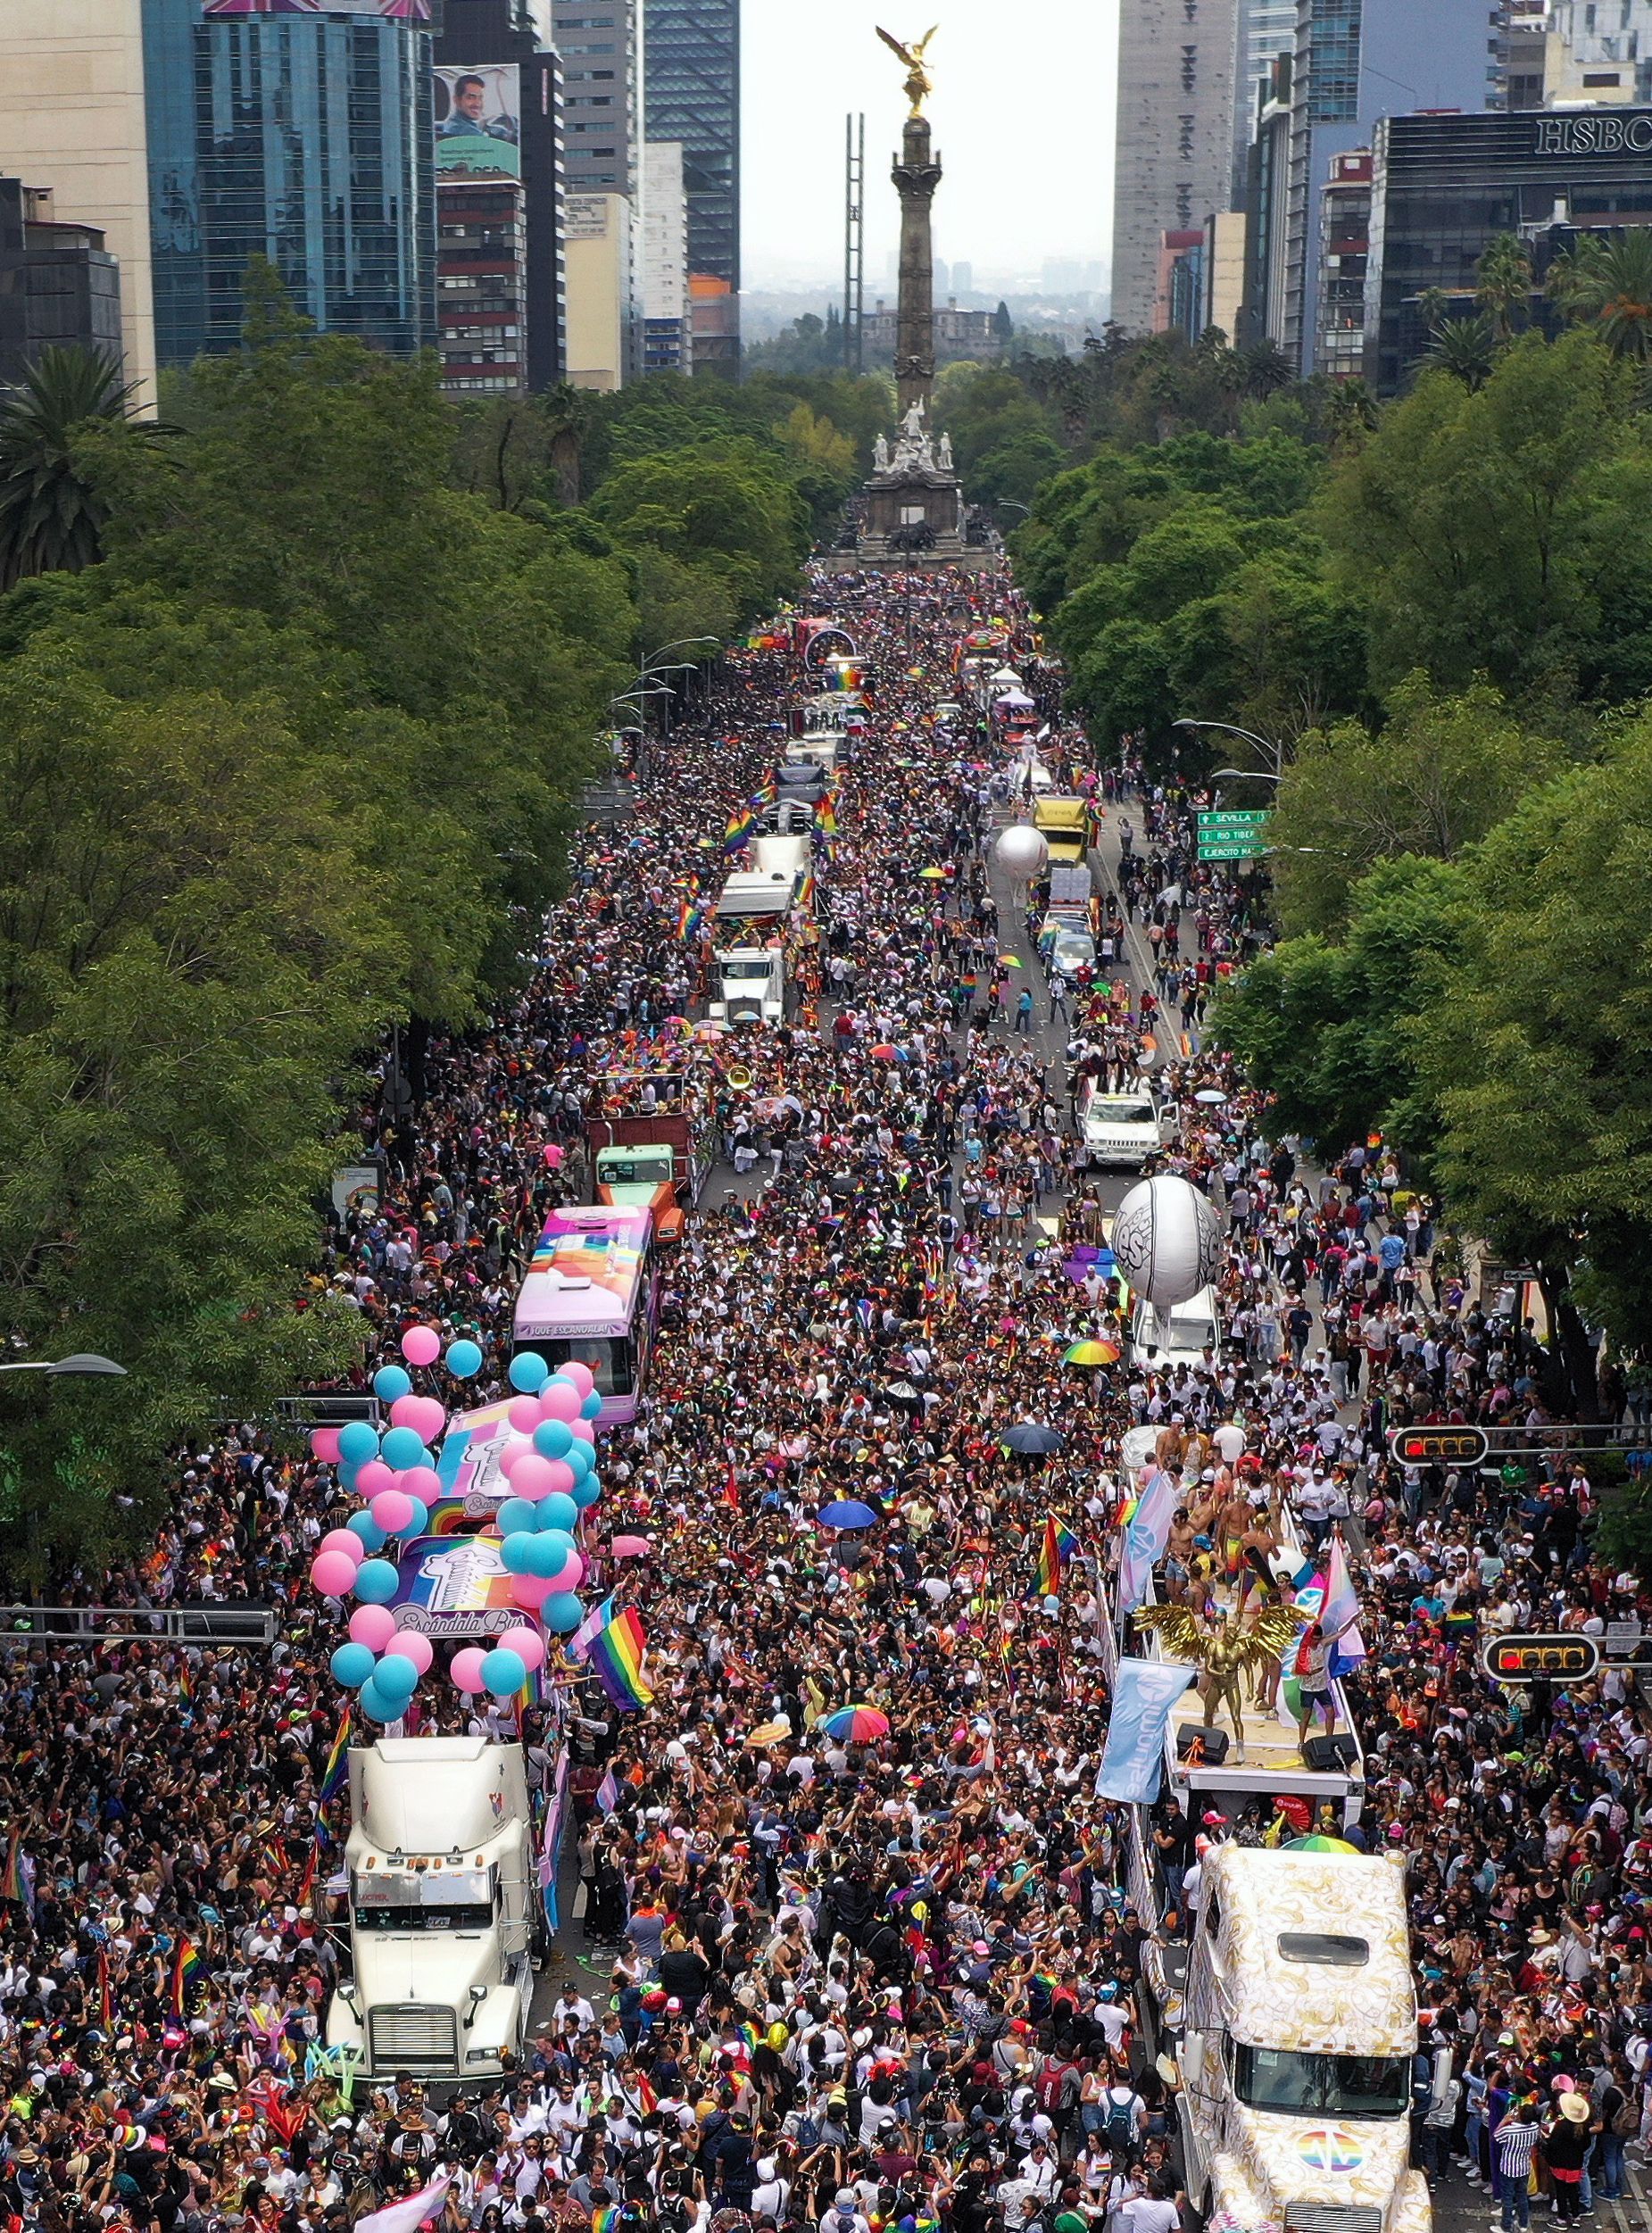 Aerial view of the 41st Gay Pride Parade along the Reforma Avenue in Mexico City on June 29.